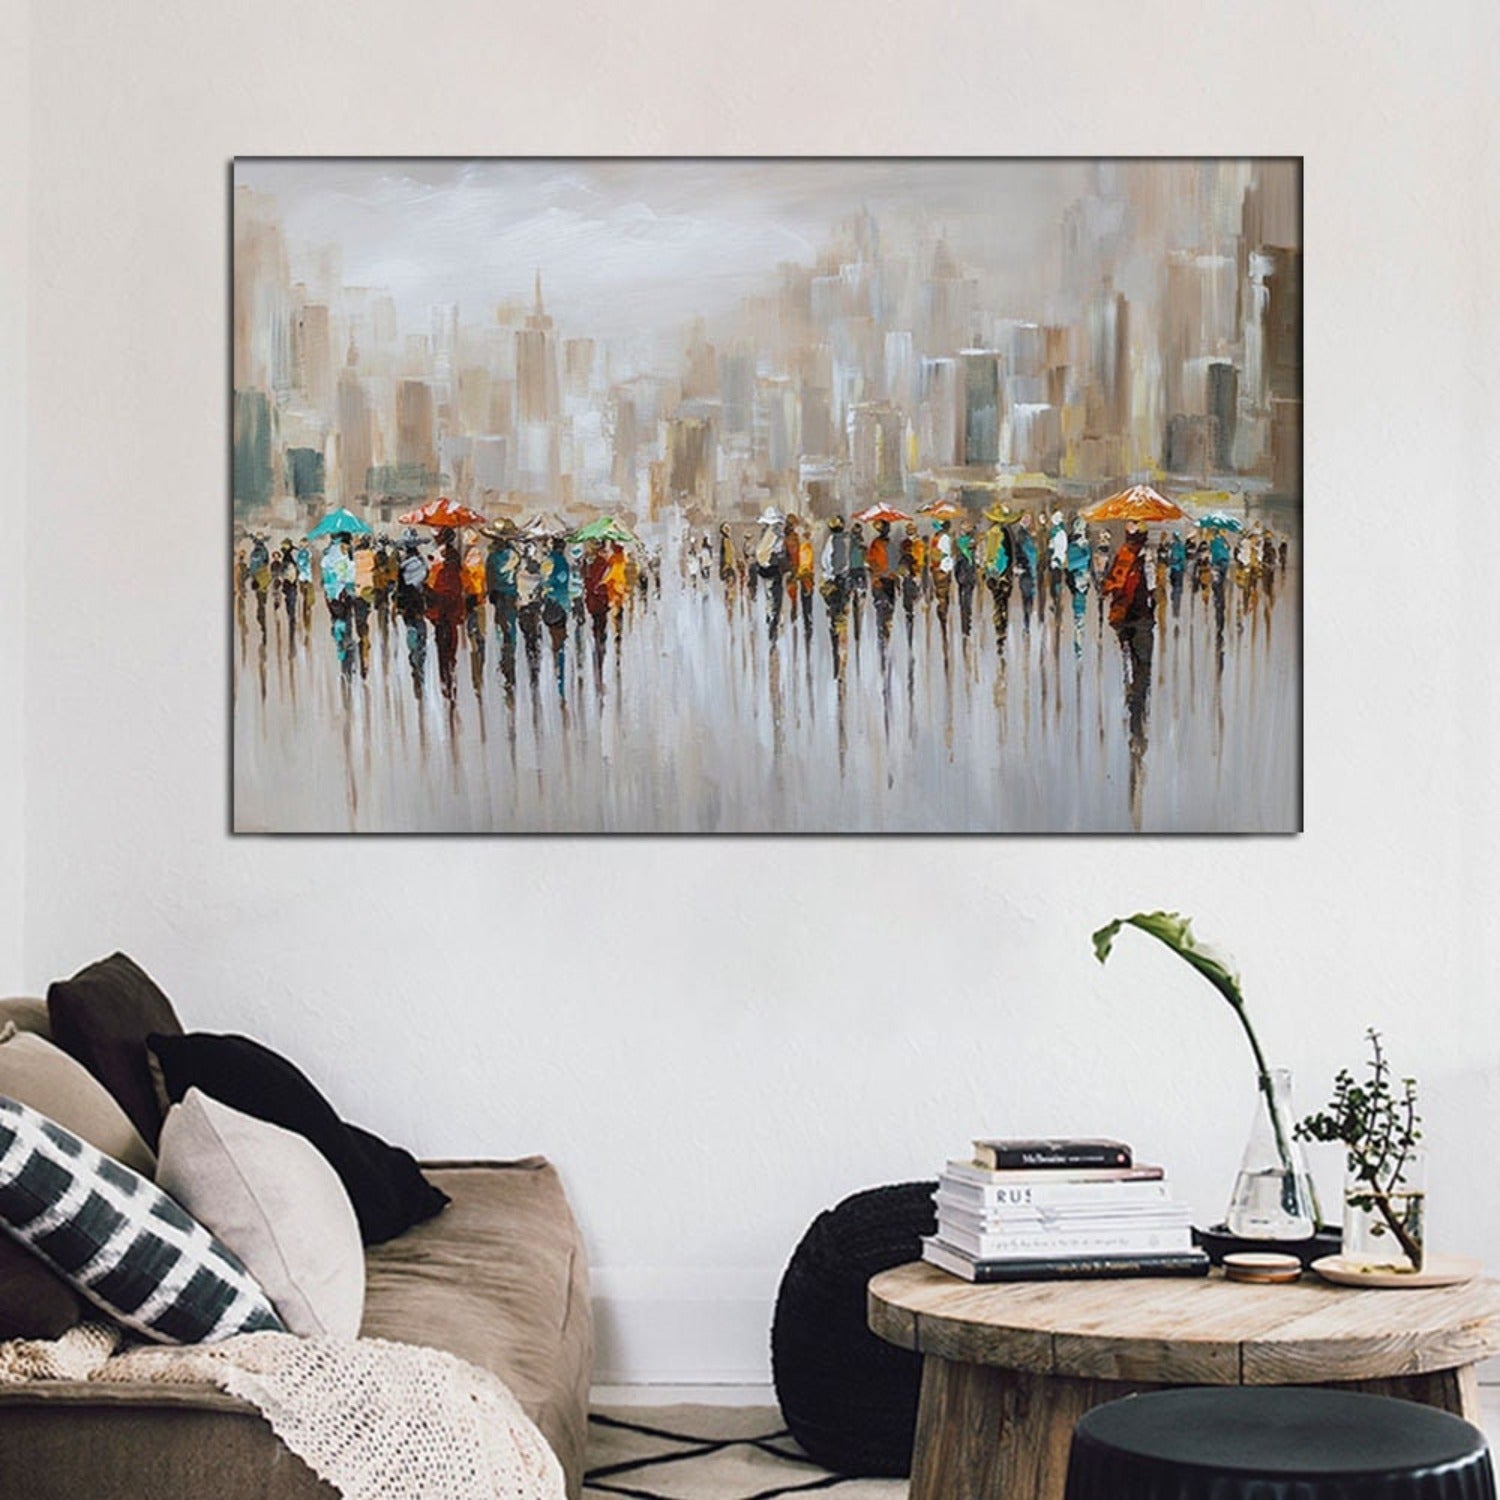 Textured Metropolis City Crowd View Abstract Art